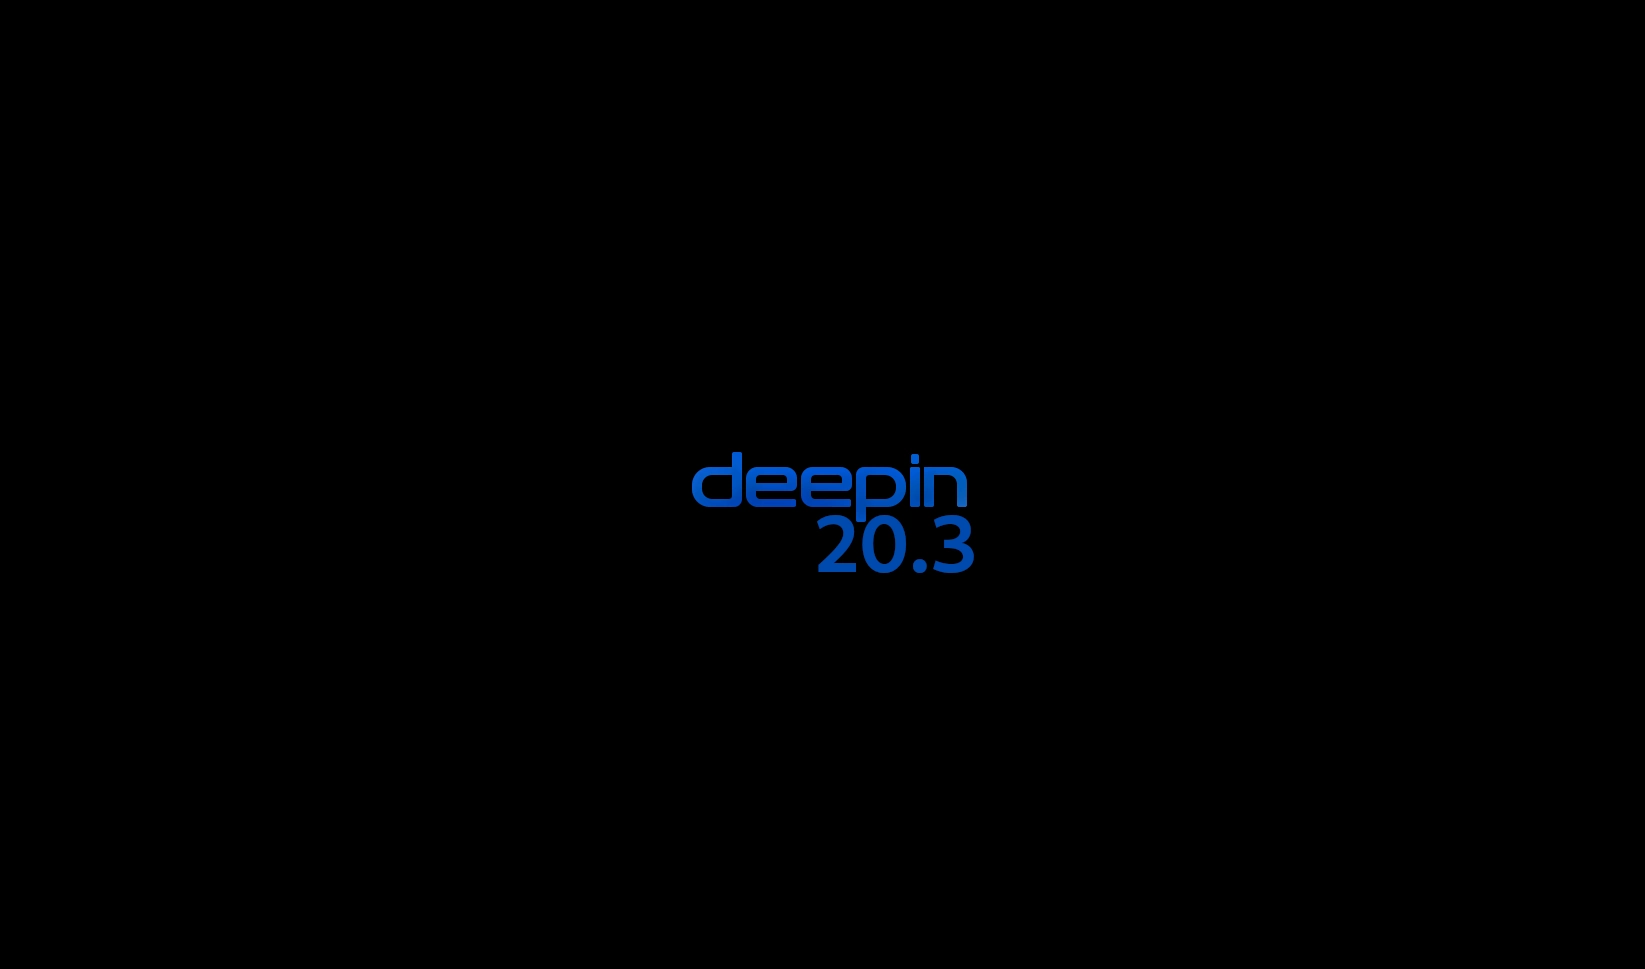 Deepin Linux 20.3 Is Out as One of the First Distros Powered by Linux Kernel 5.15 LTS